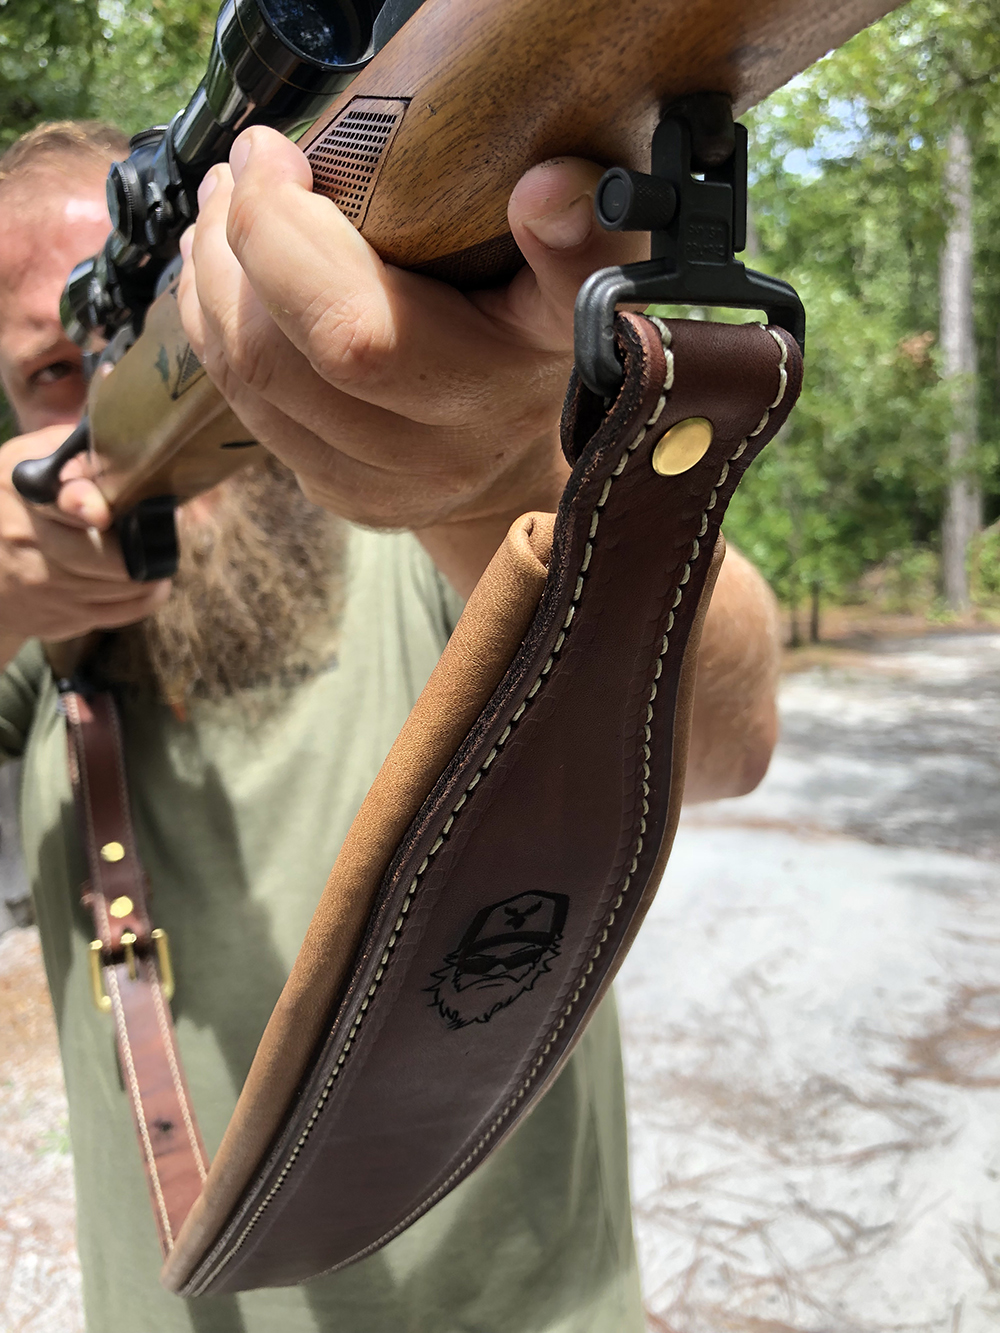 Mean Gene Sling Offers Hunting Slings - Fifty Shades of FDE